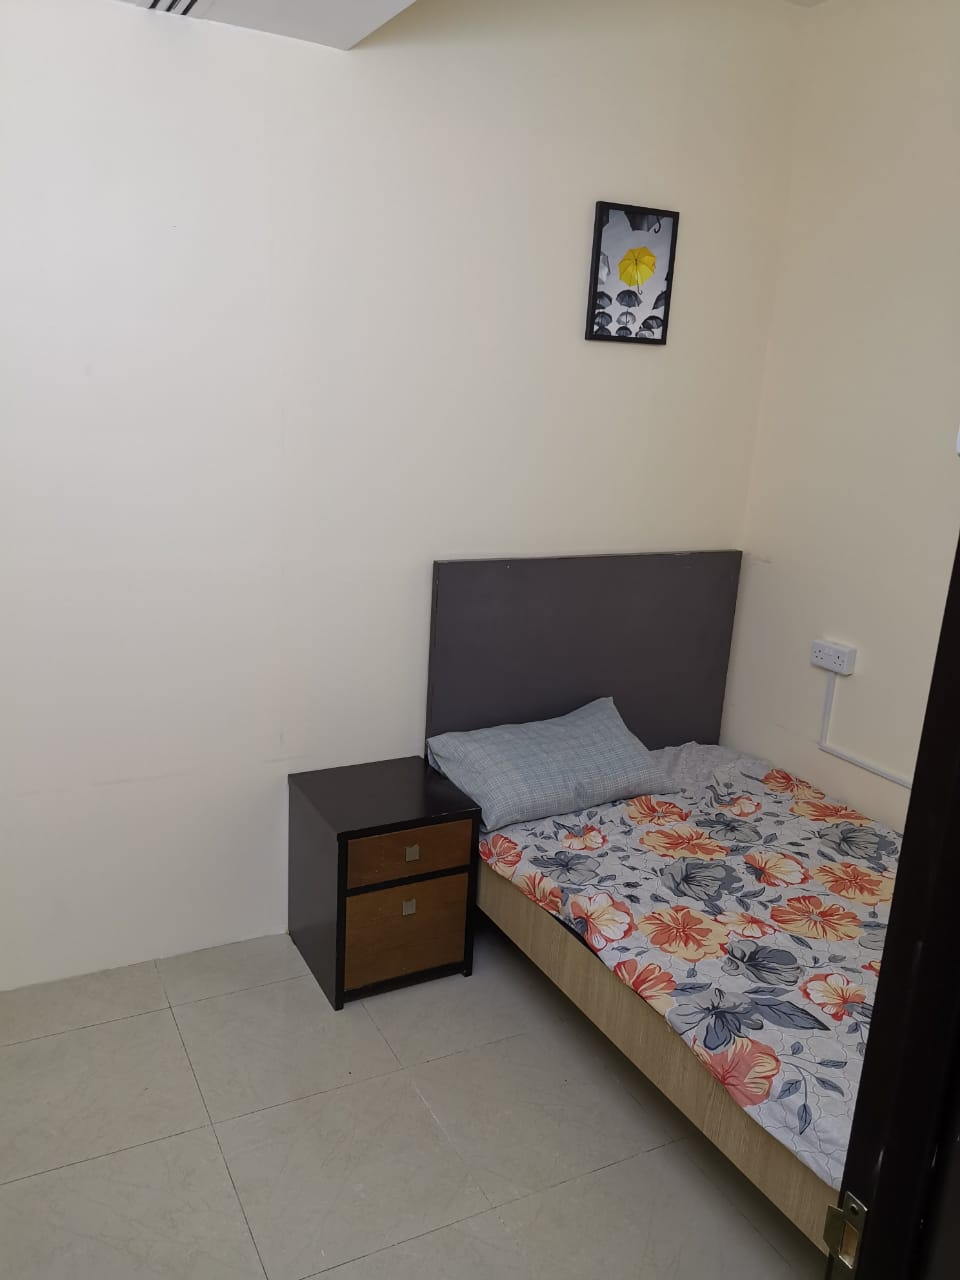 Couples Rooms for Kabayan in Very Cheap Price in Bur Dubai